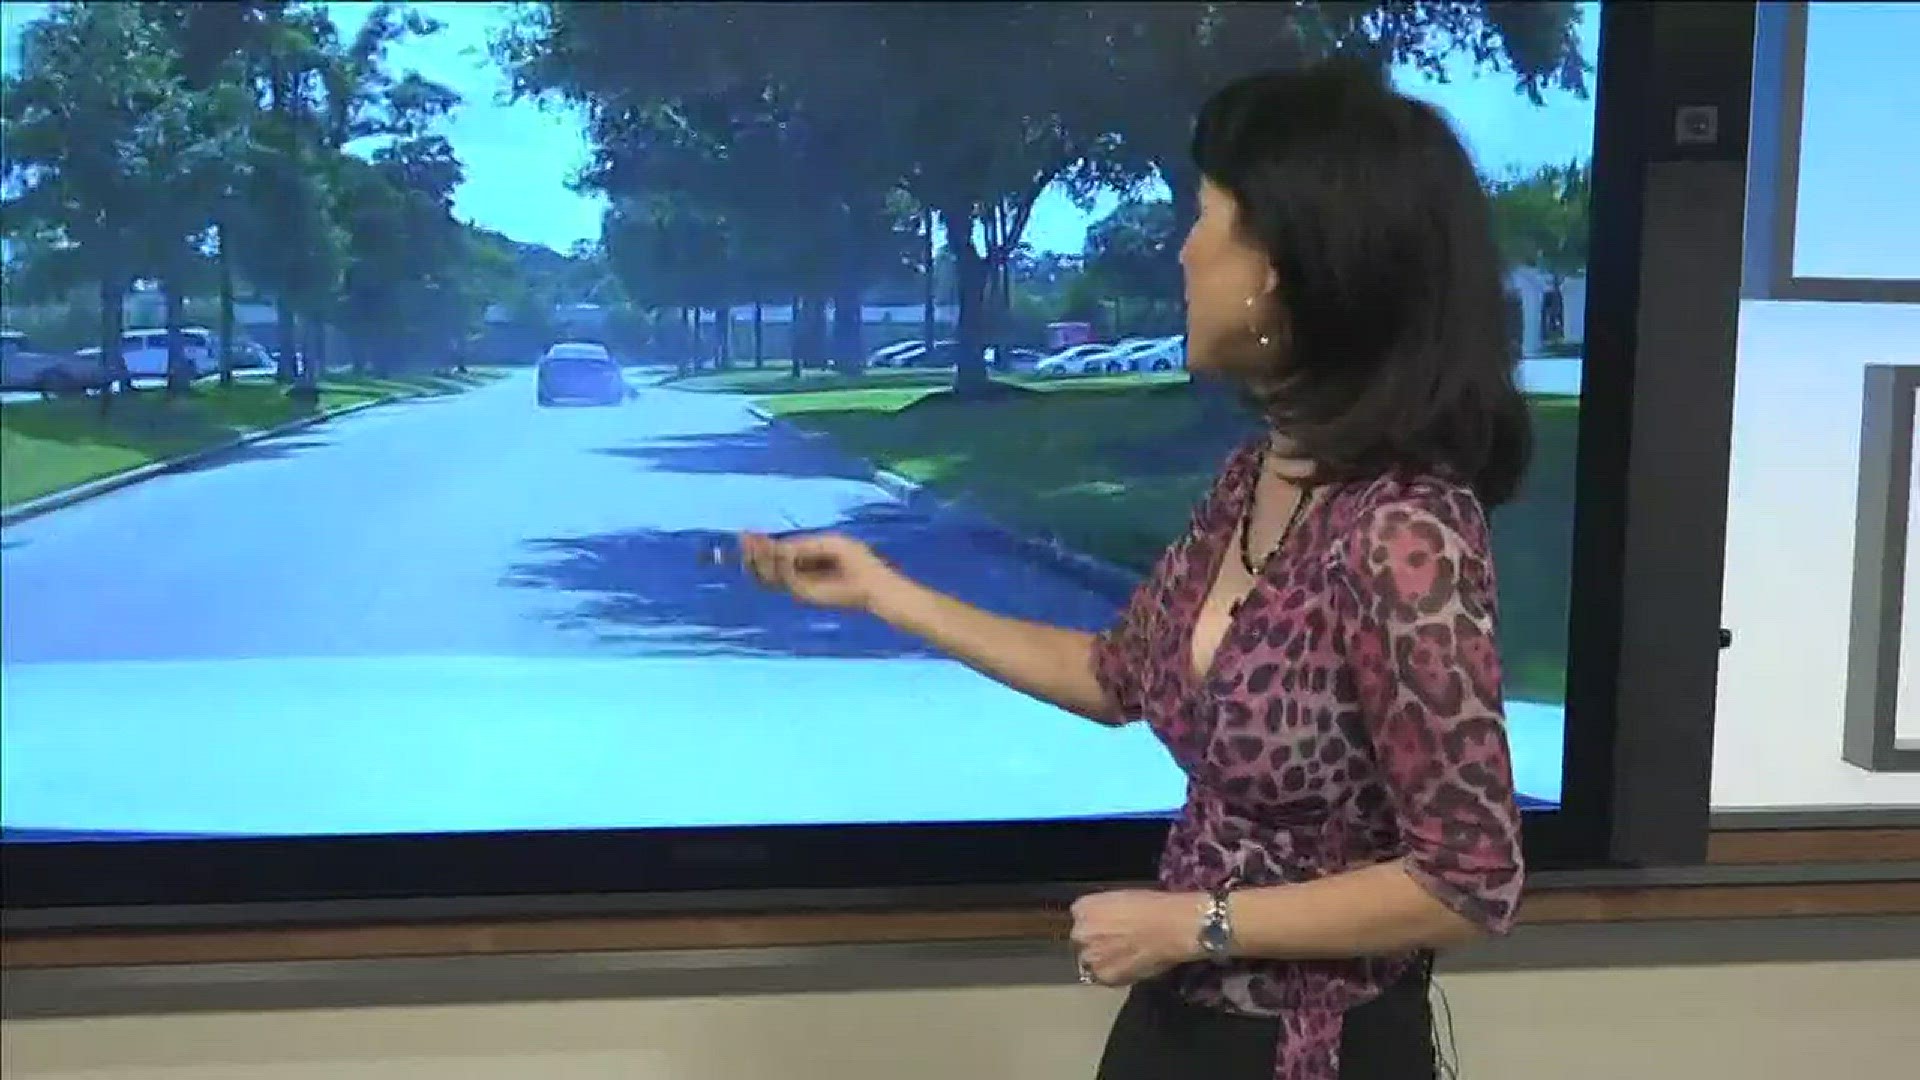 KHOU 11 News Anchor Sher-Min Chow shares dramatic police dashcam video of a chase that took place in Montgomery County. Watch the play-by-play of what happened.